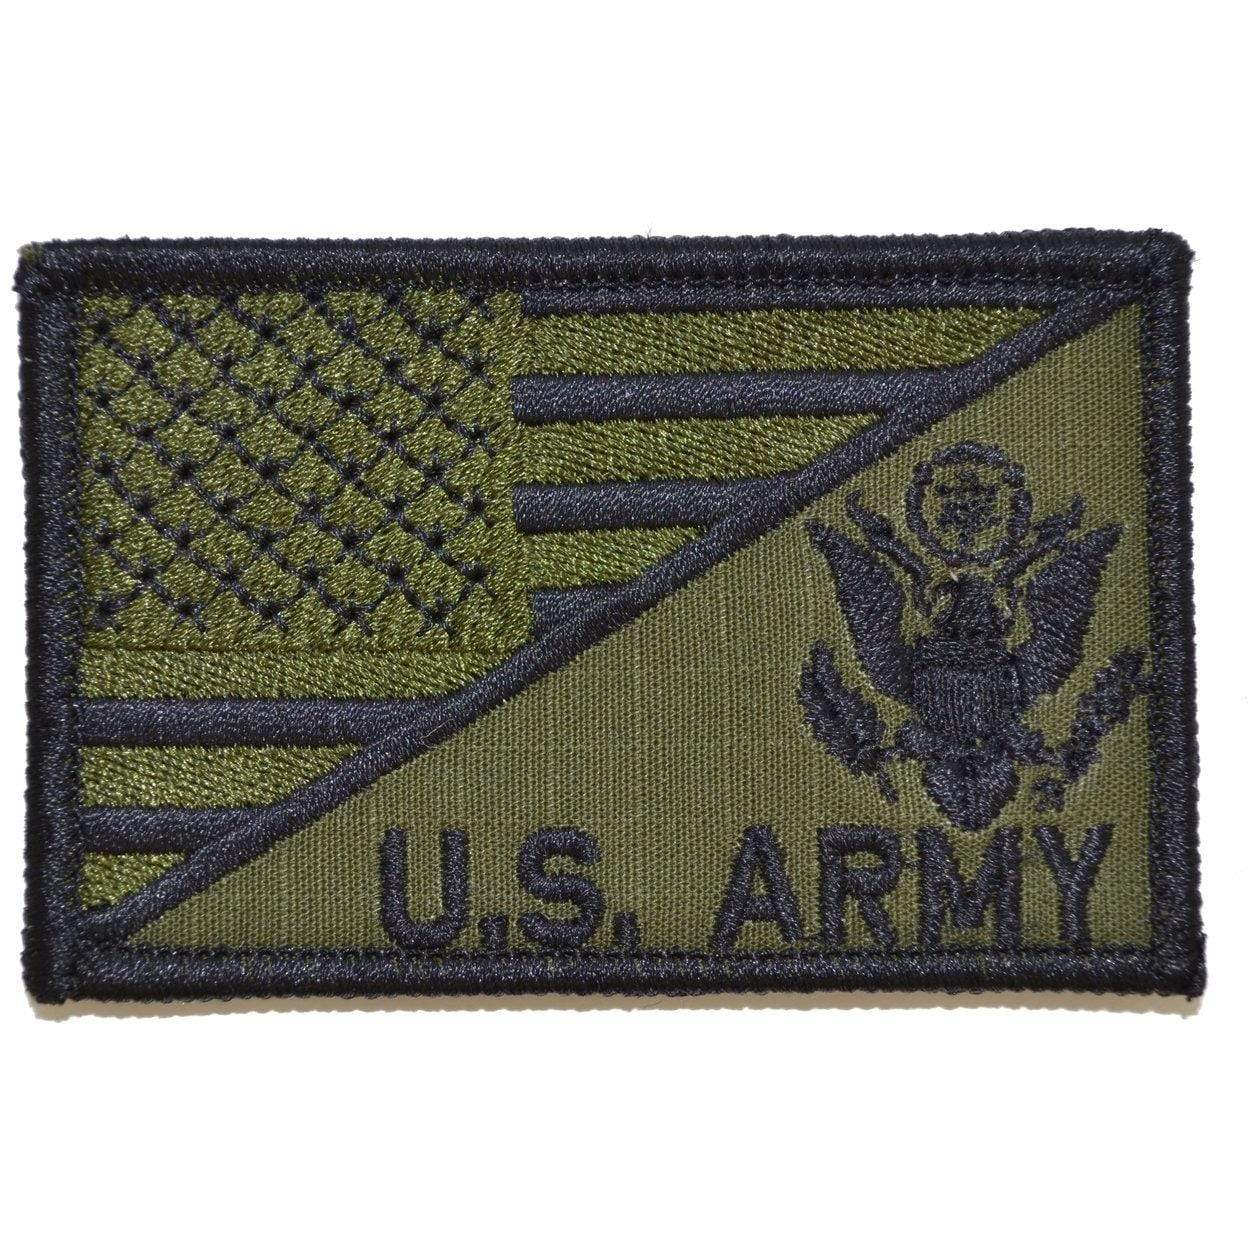 Tactical Gear Junkie Patches Olive Drab US Army Crest With Text USA Flag - 2.25x3.5 Patch